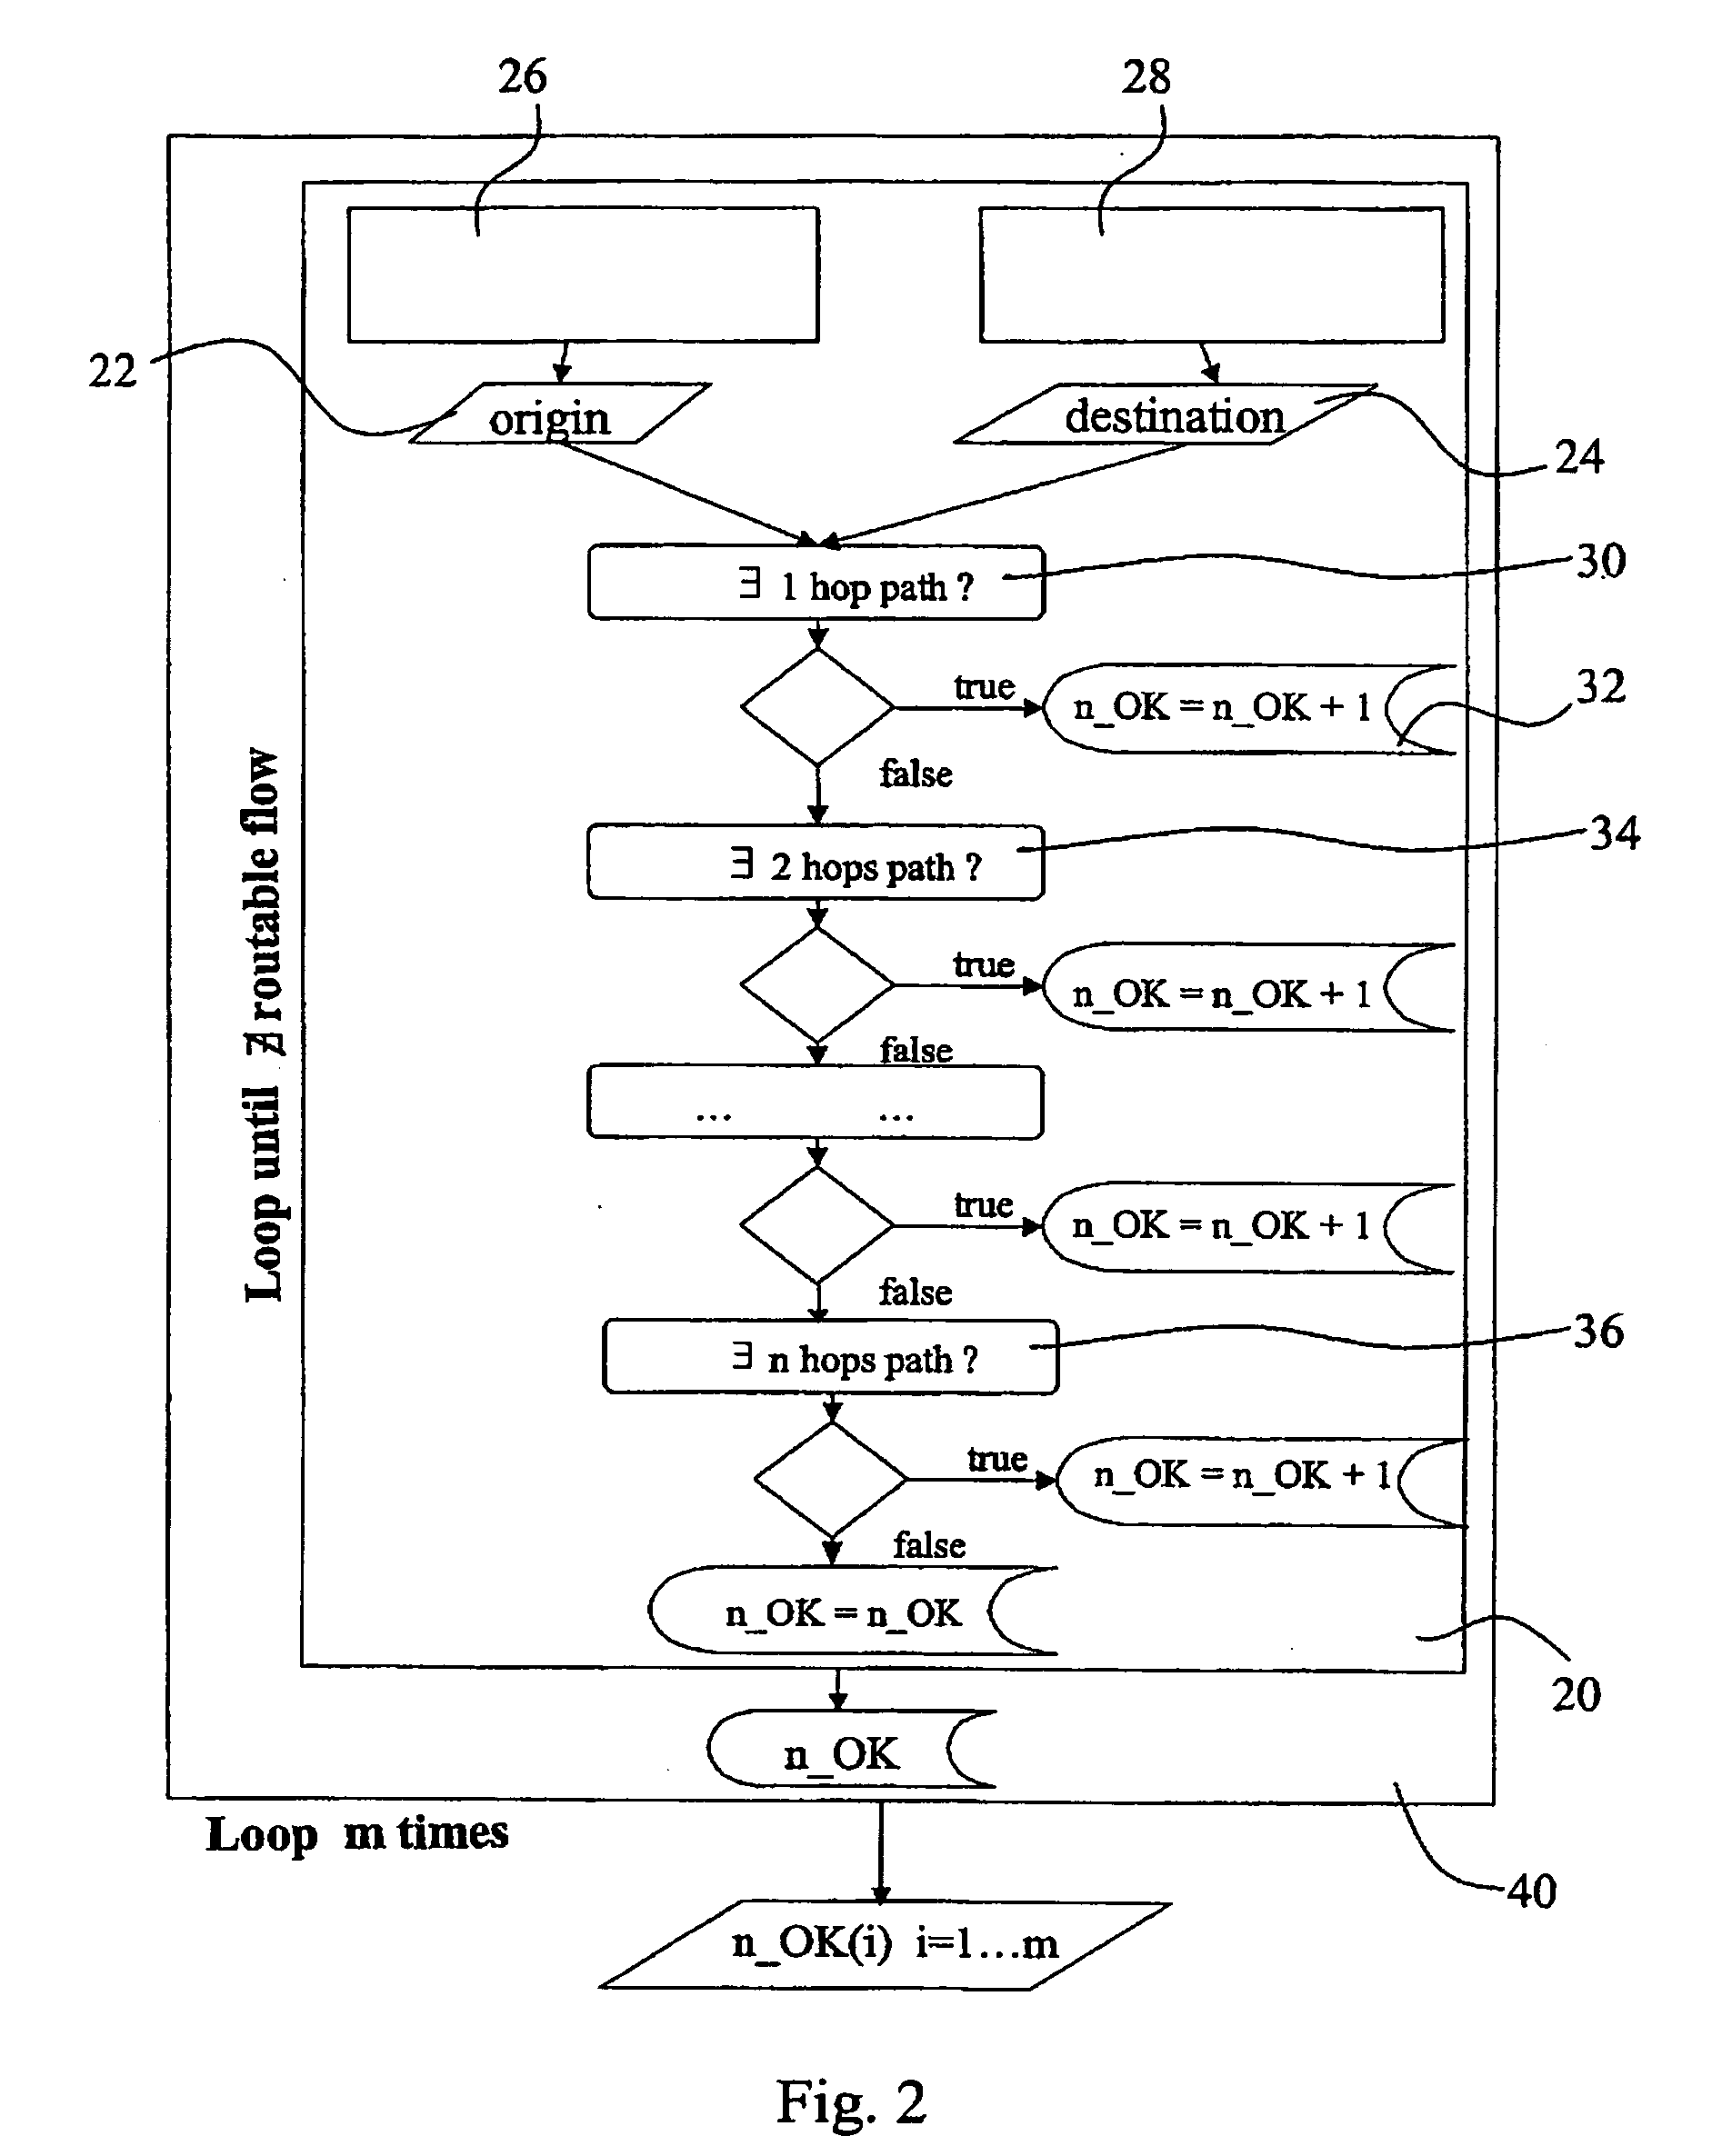 Method and device for designing a data network